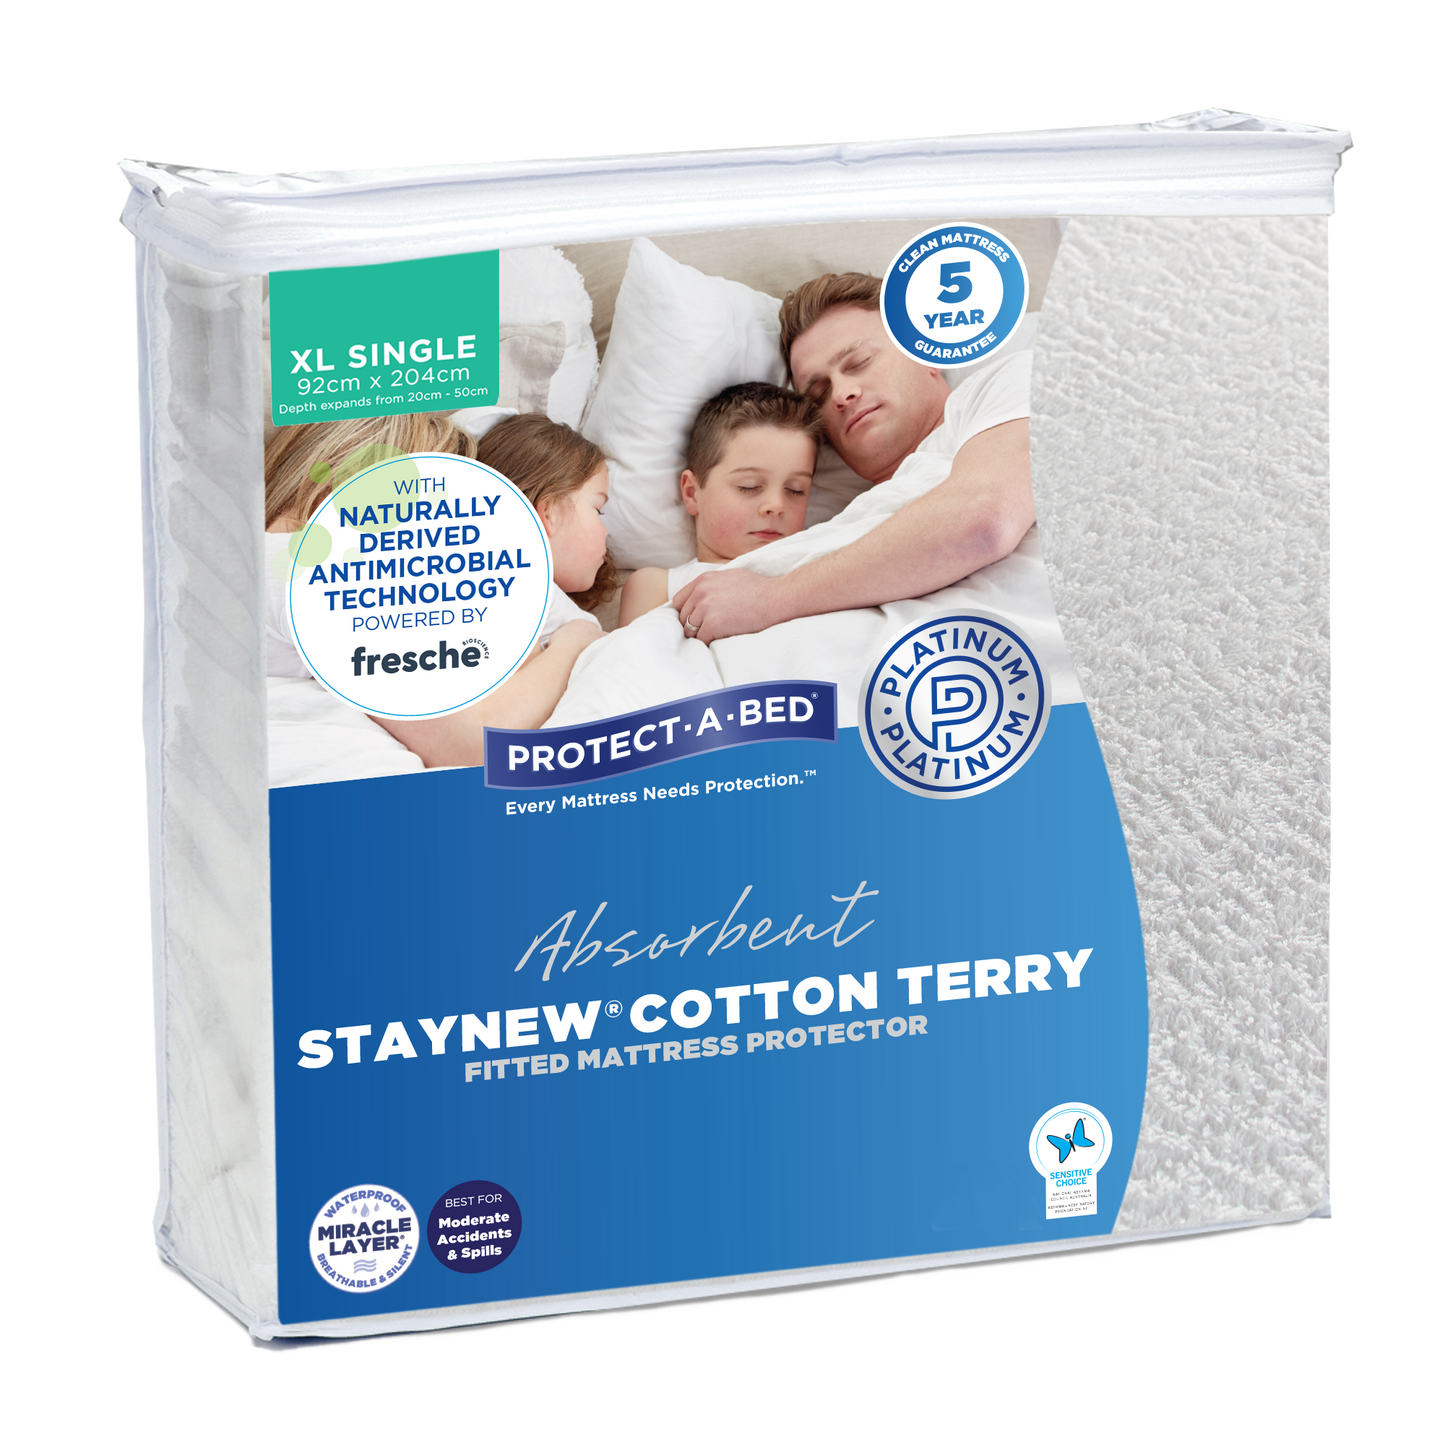 Protect-A-Bed Staynew® Bundle Double